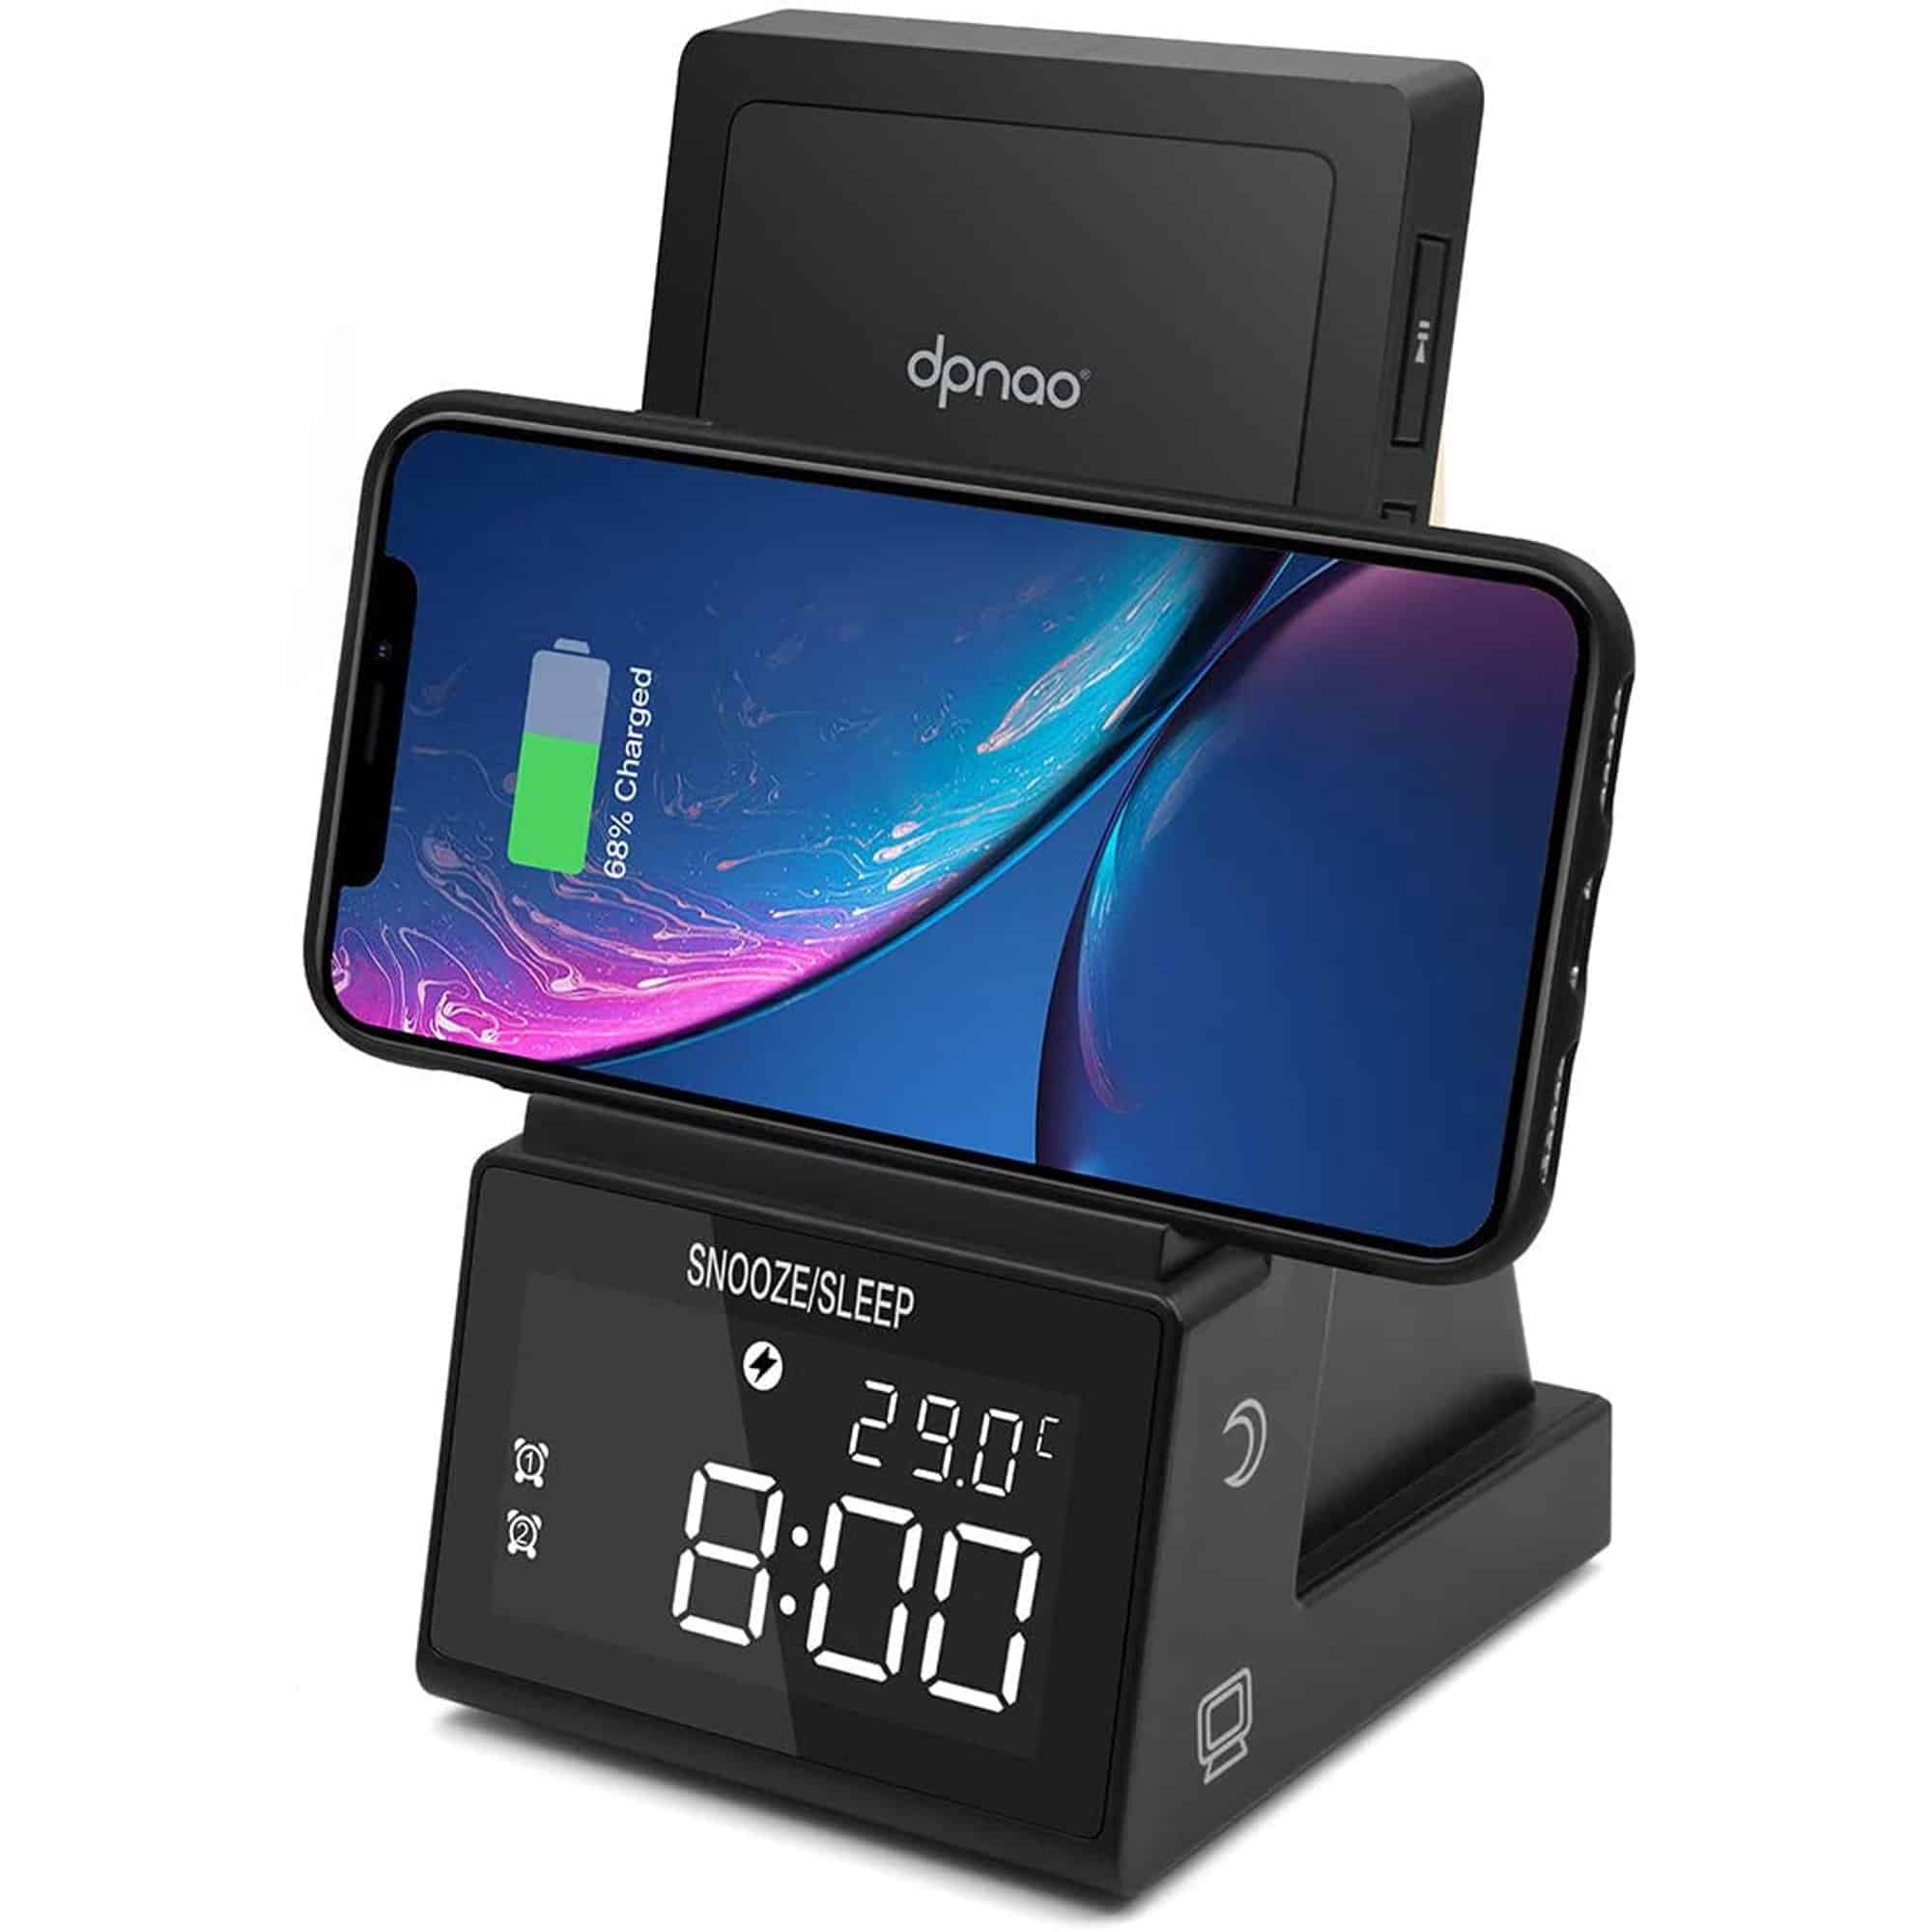 dpnao Alarm Clock with Wireless Charging Dock Stand